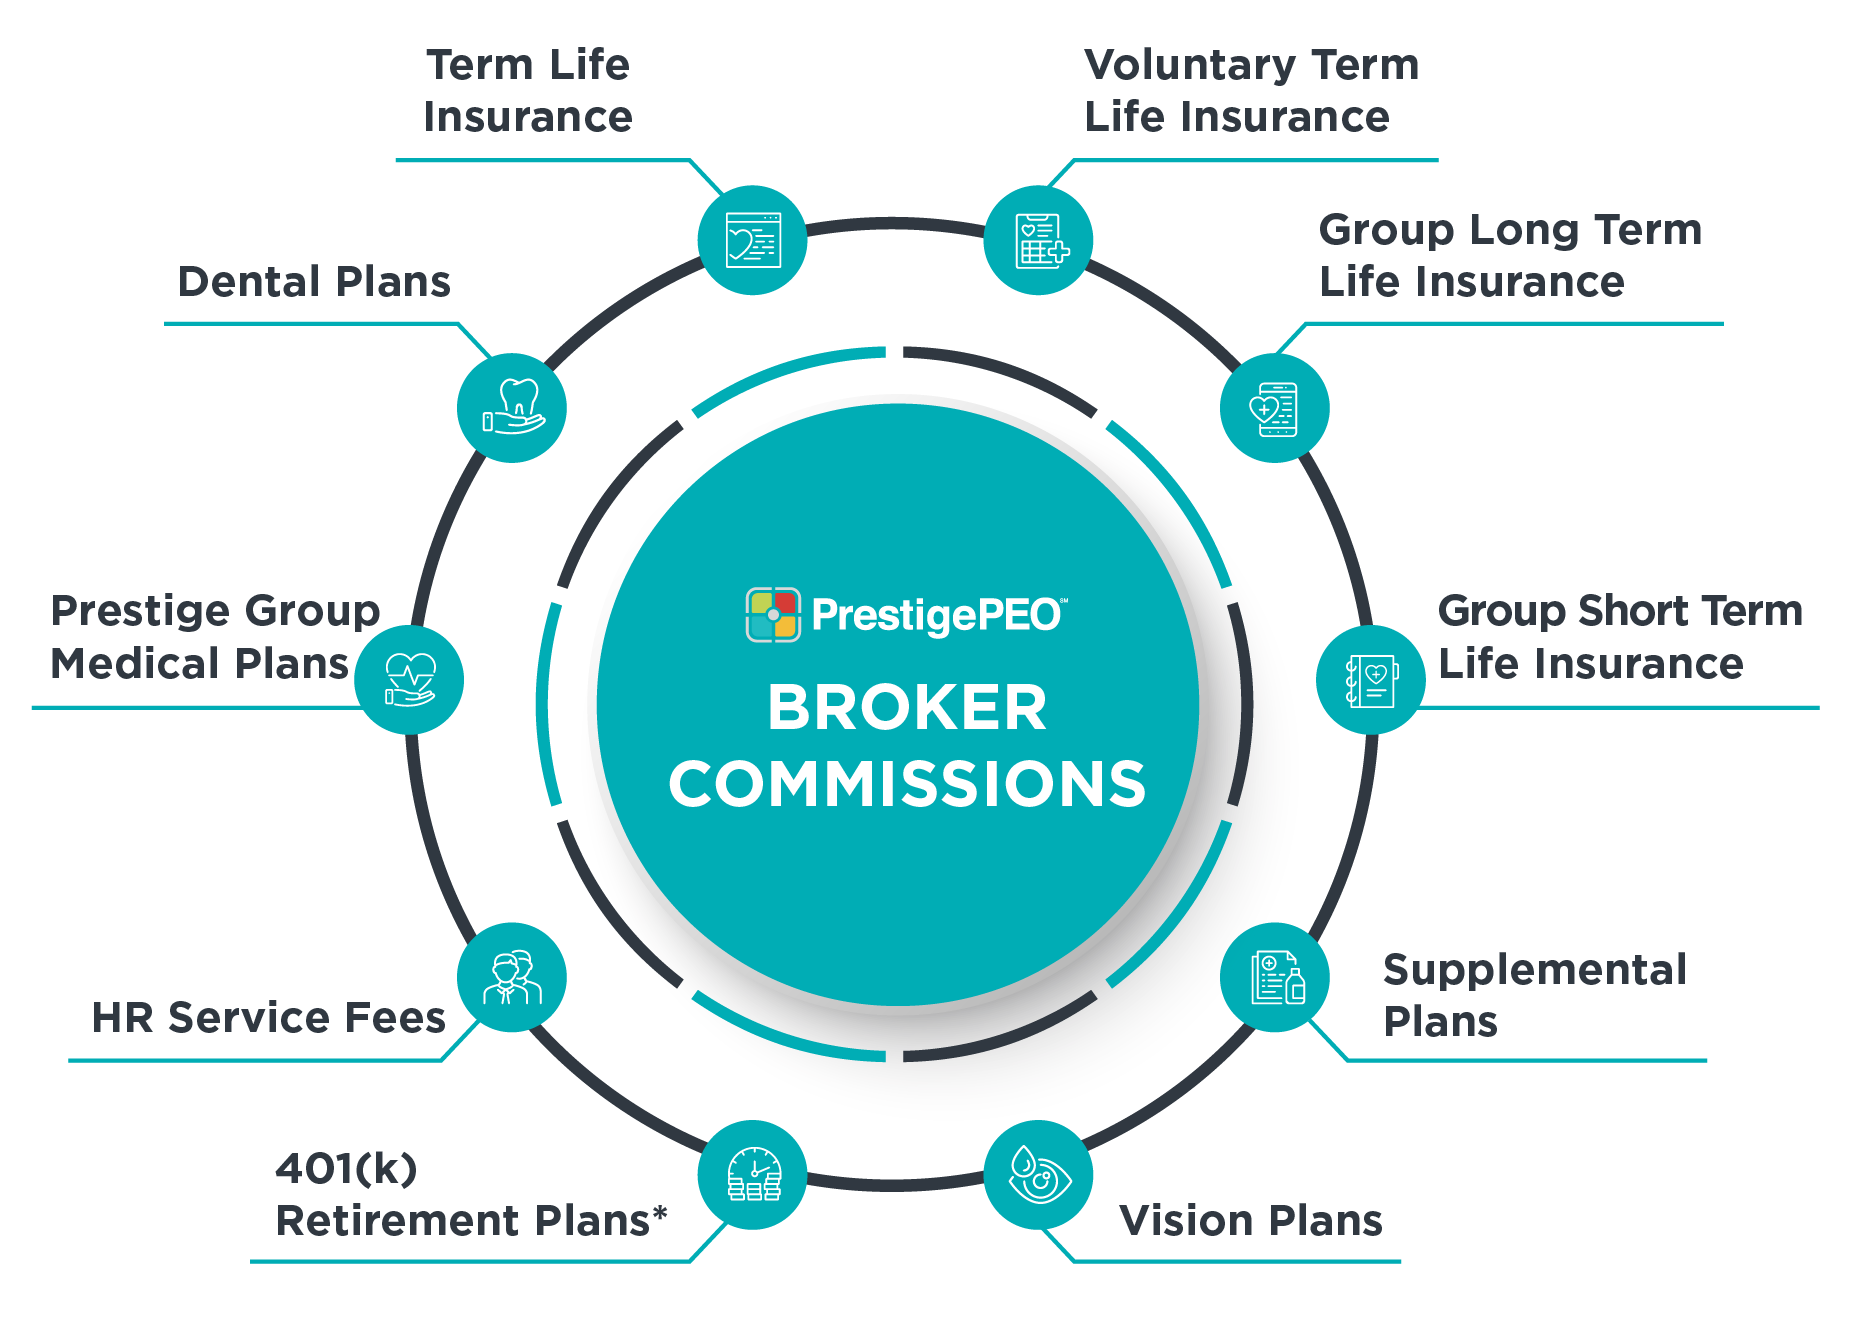 PEO Broker Commissions Image